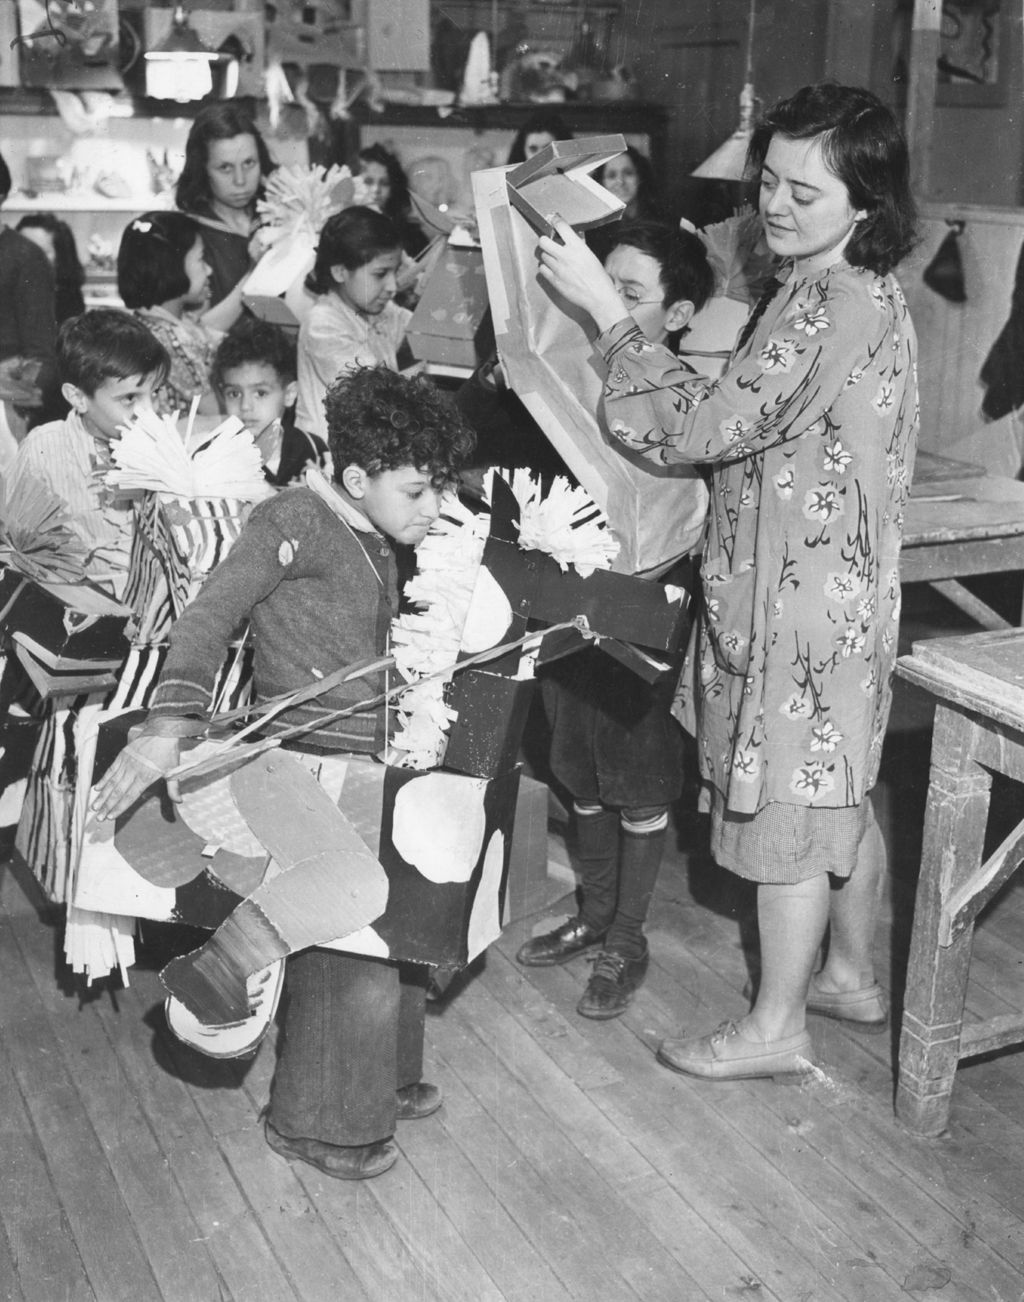 Hull-House instructor Branka Cuculic helps children prepare horse costumes for 50th Anniversary circus